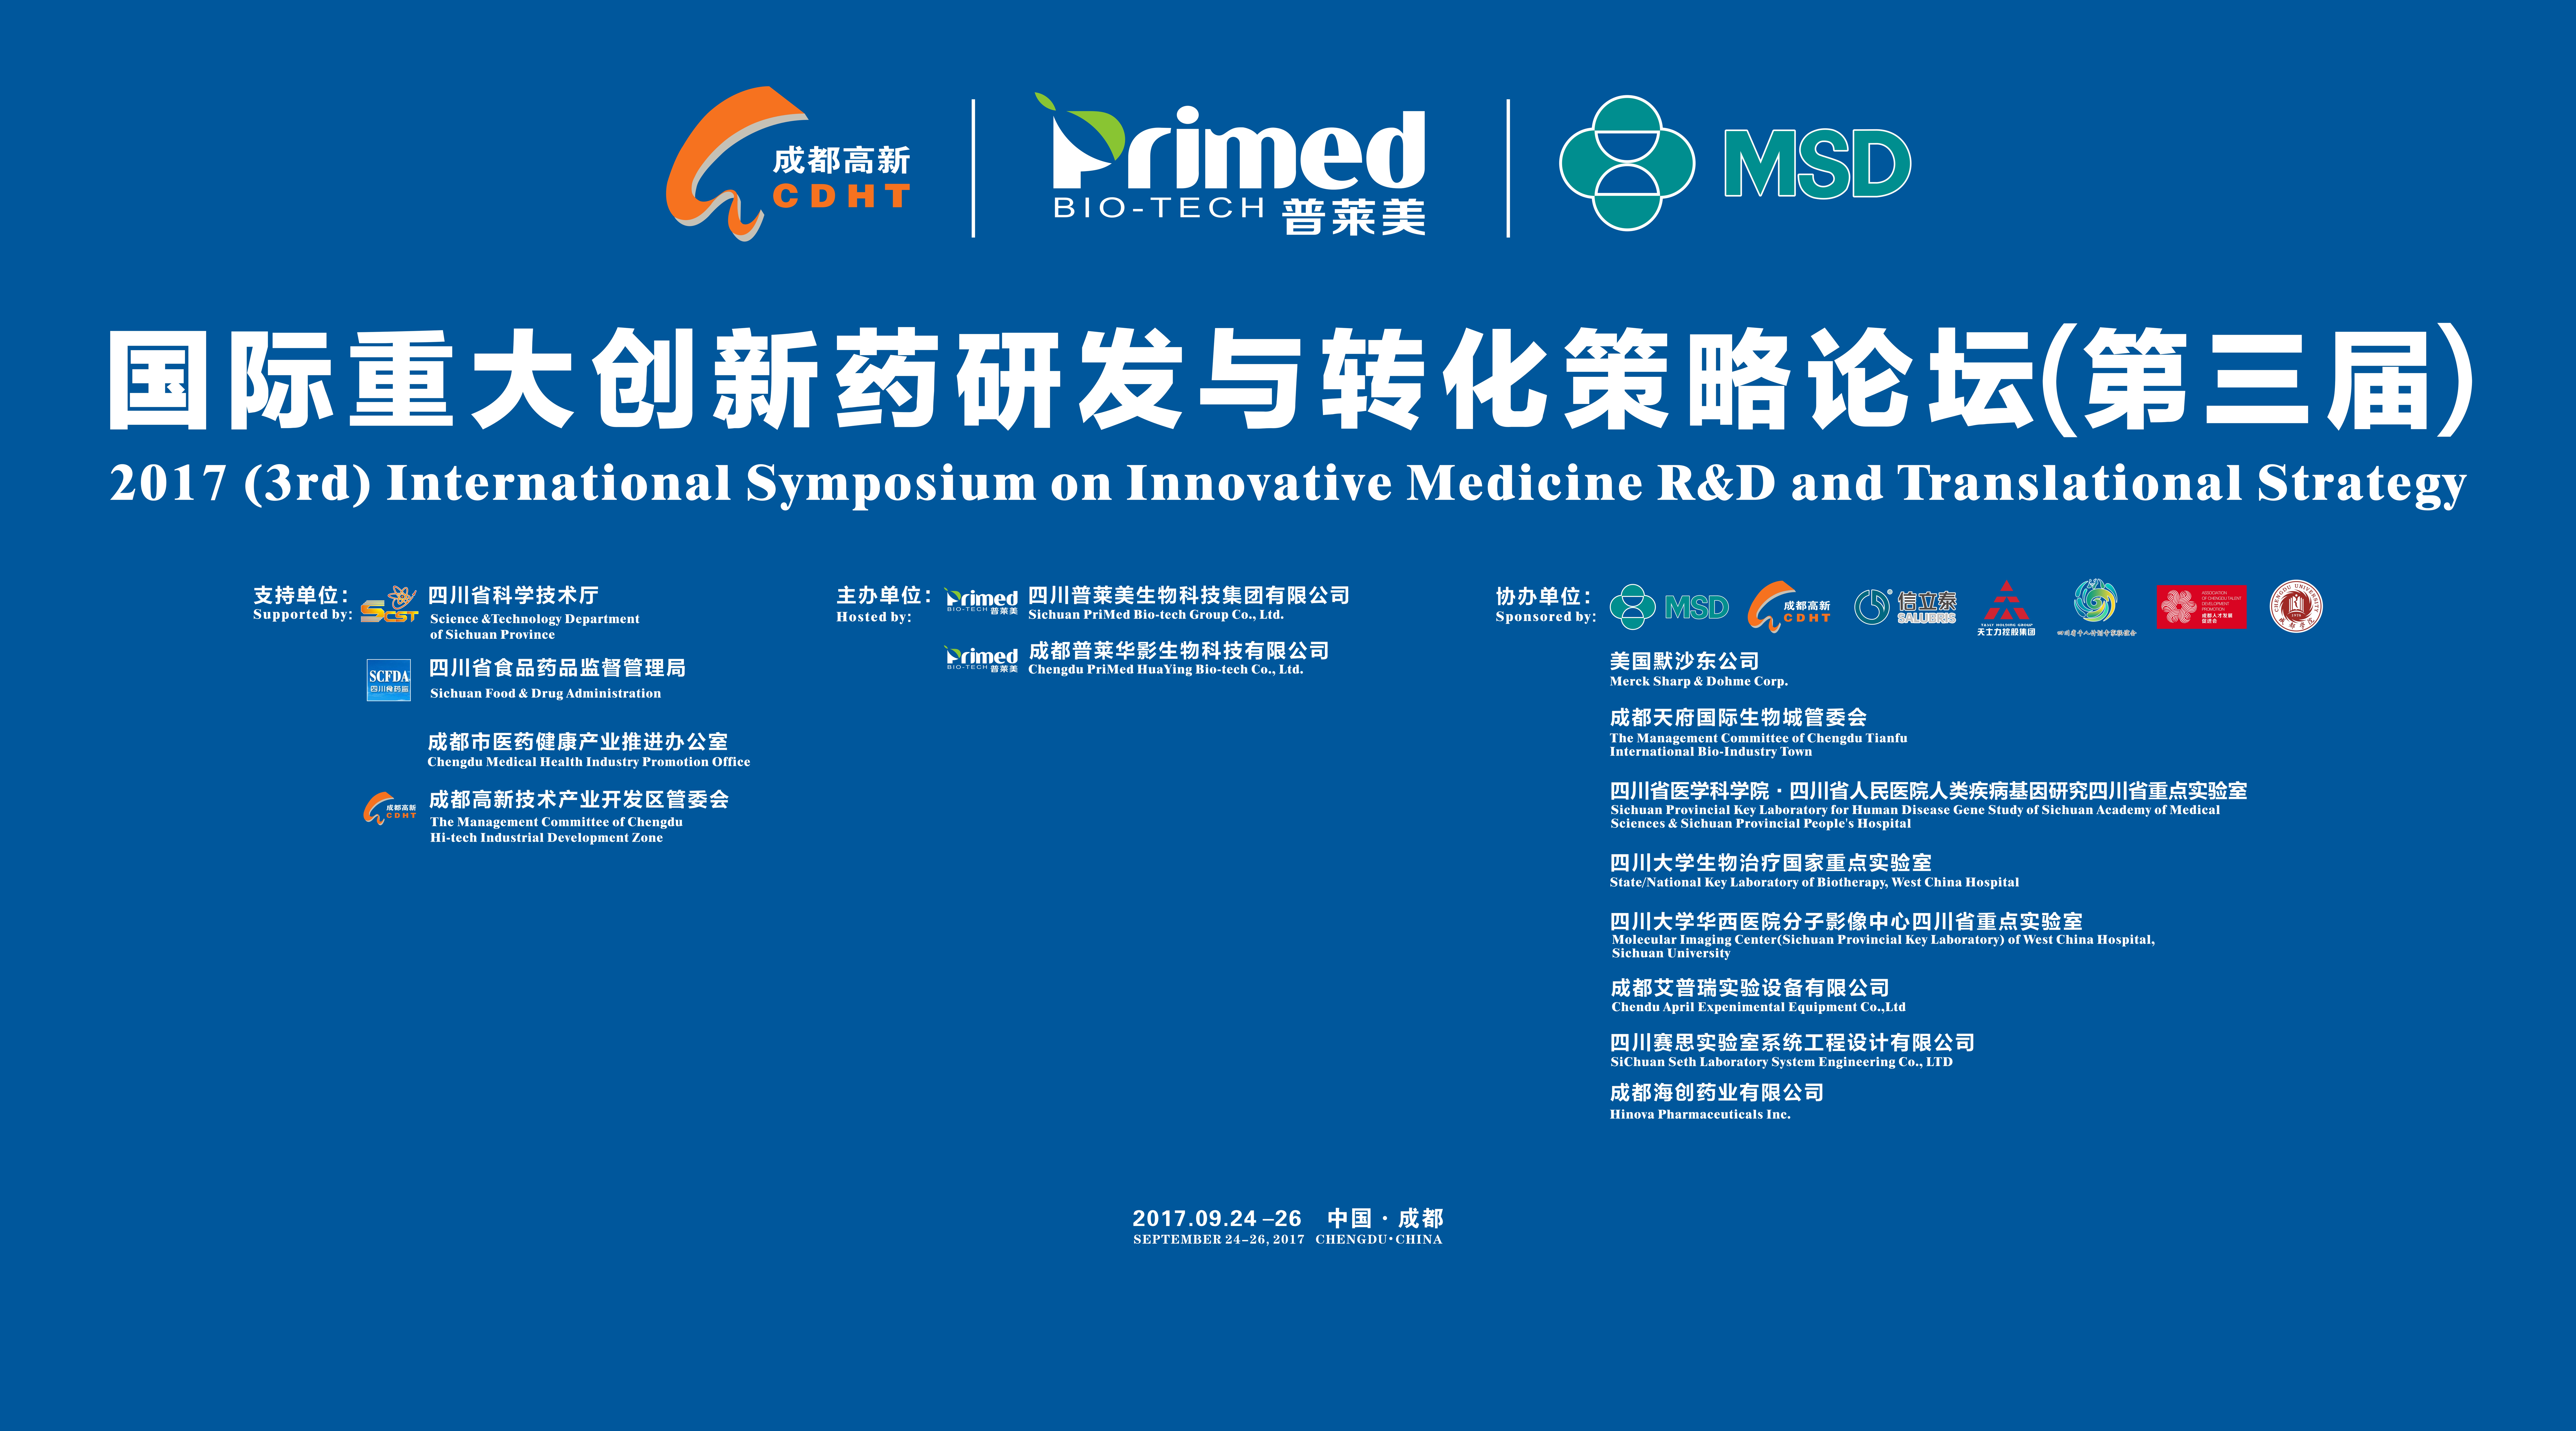 2017(3rd) International Symposium on Innovative Medicine Research & Development and Translational Strategy Was Successfully Held in Chengdu